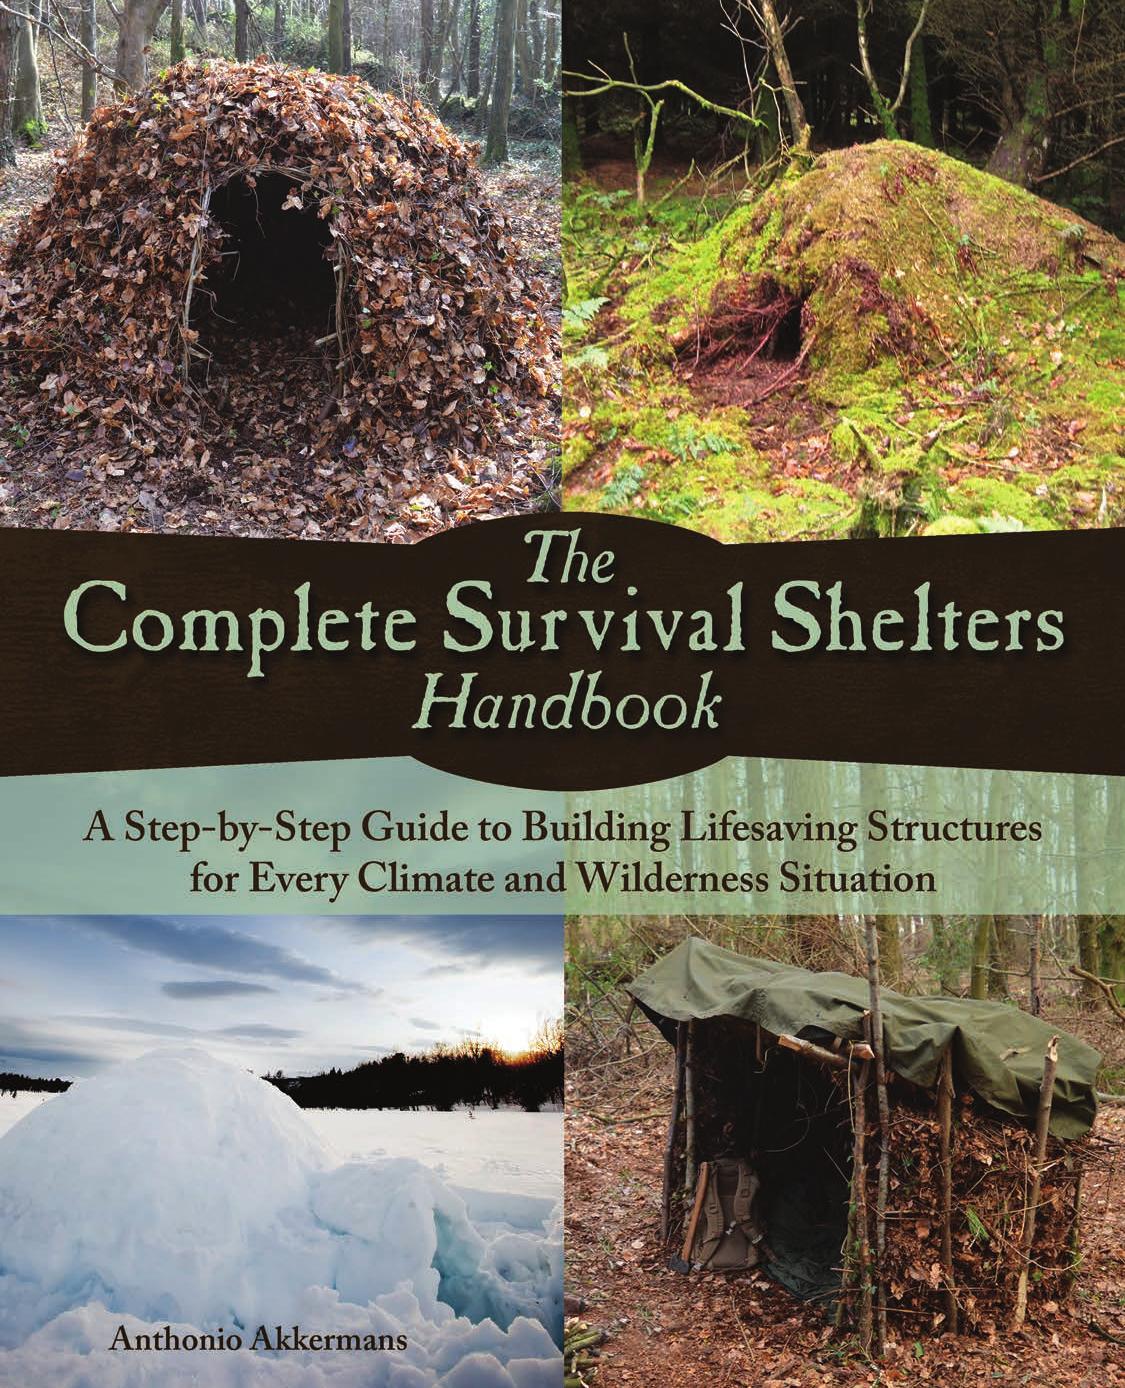 The Complete Survival Shelters Handbook by Anthonio Akkermans